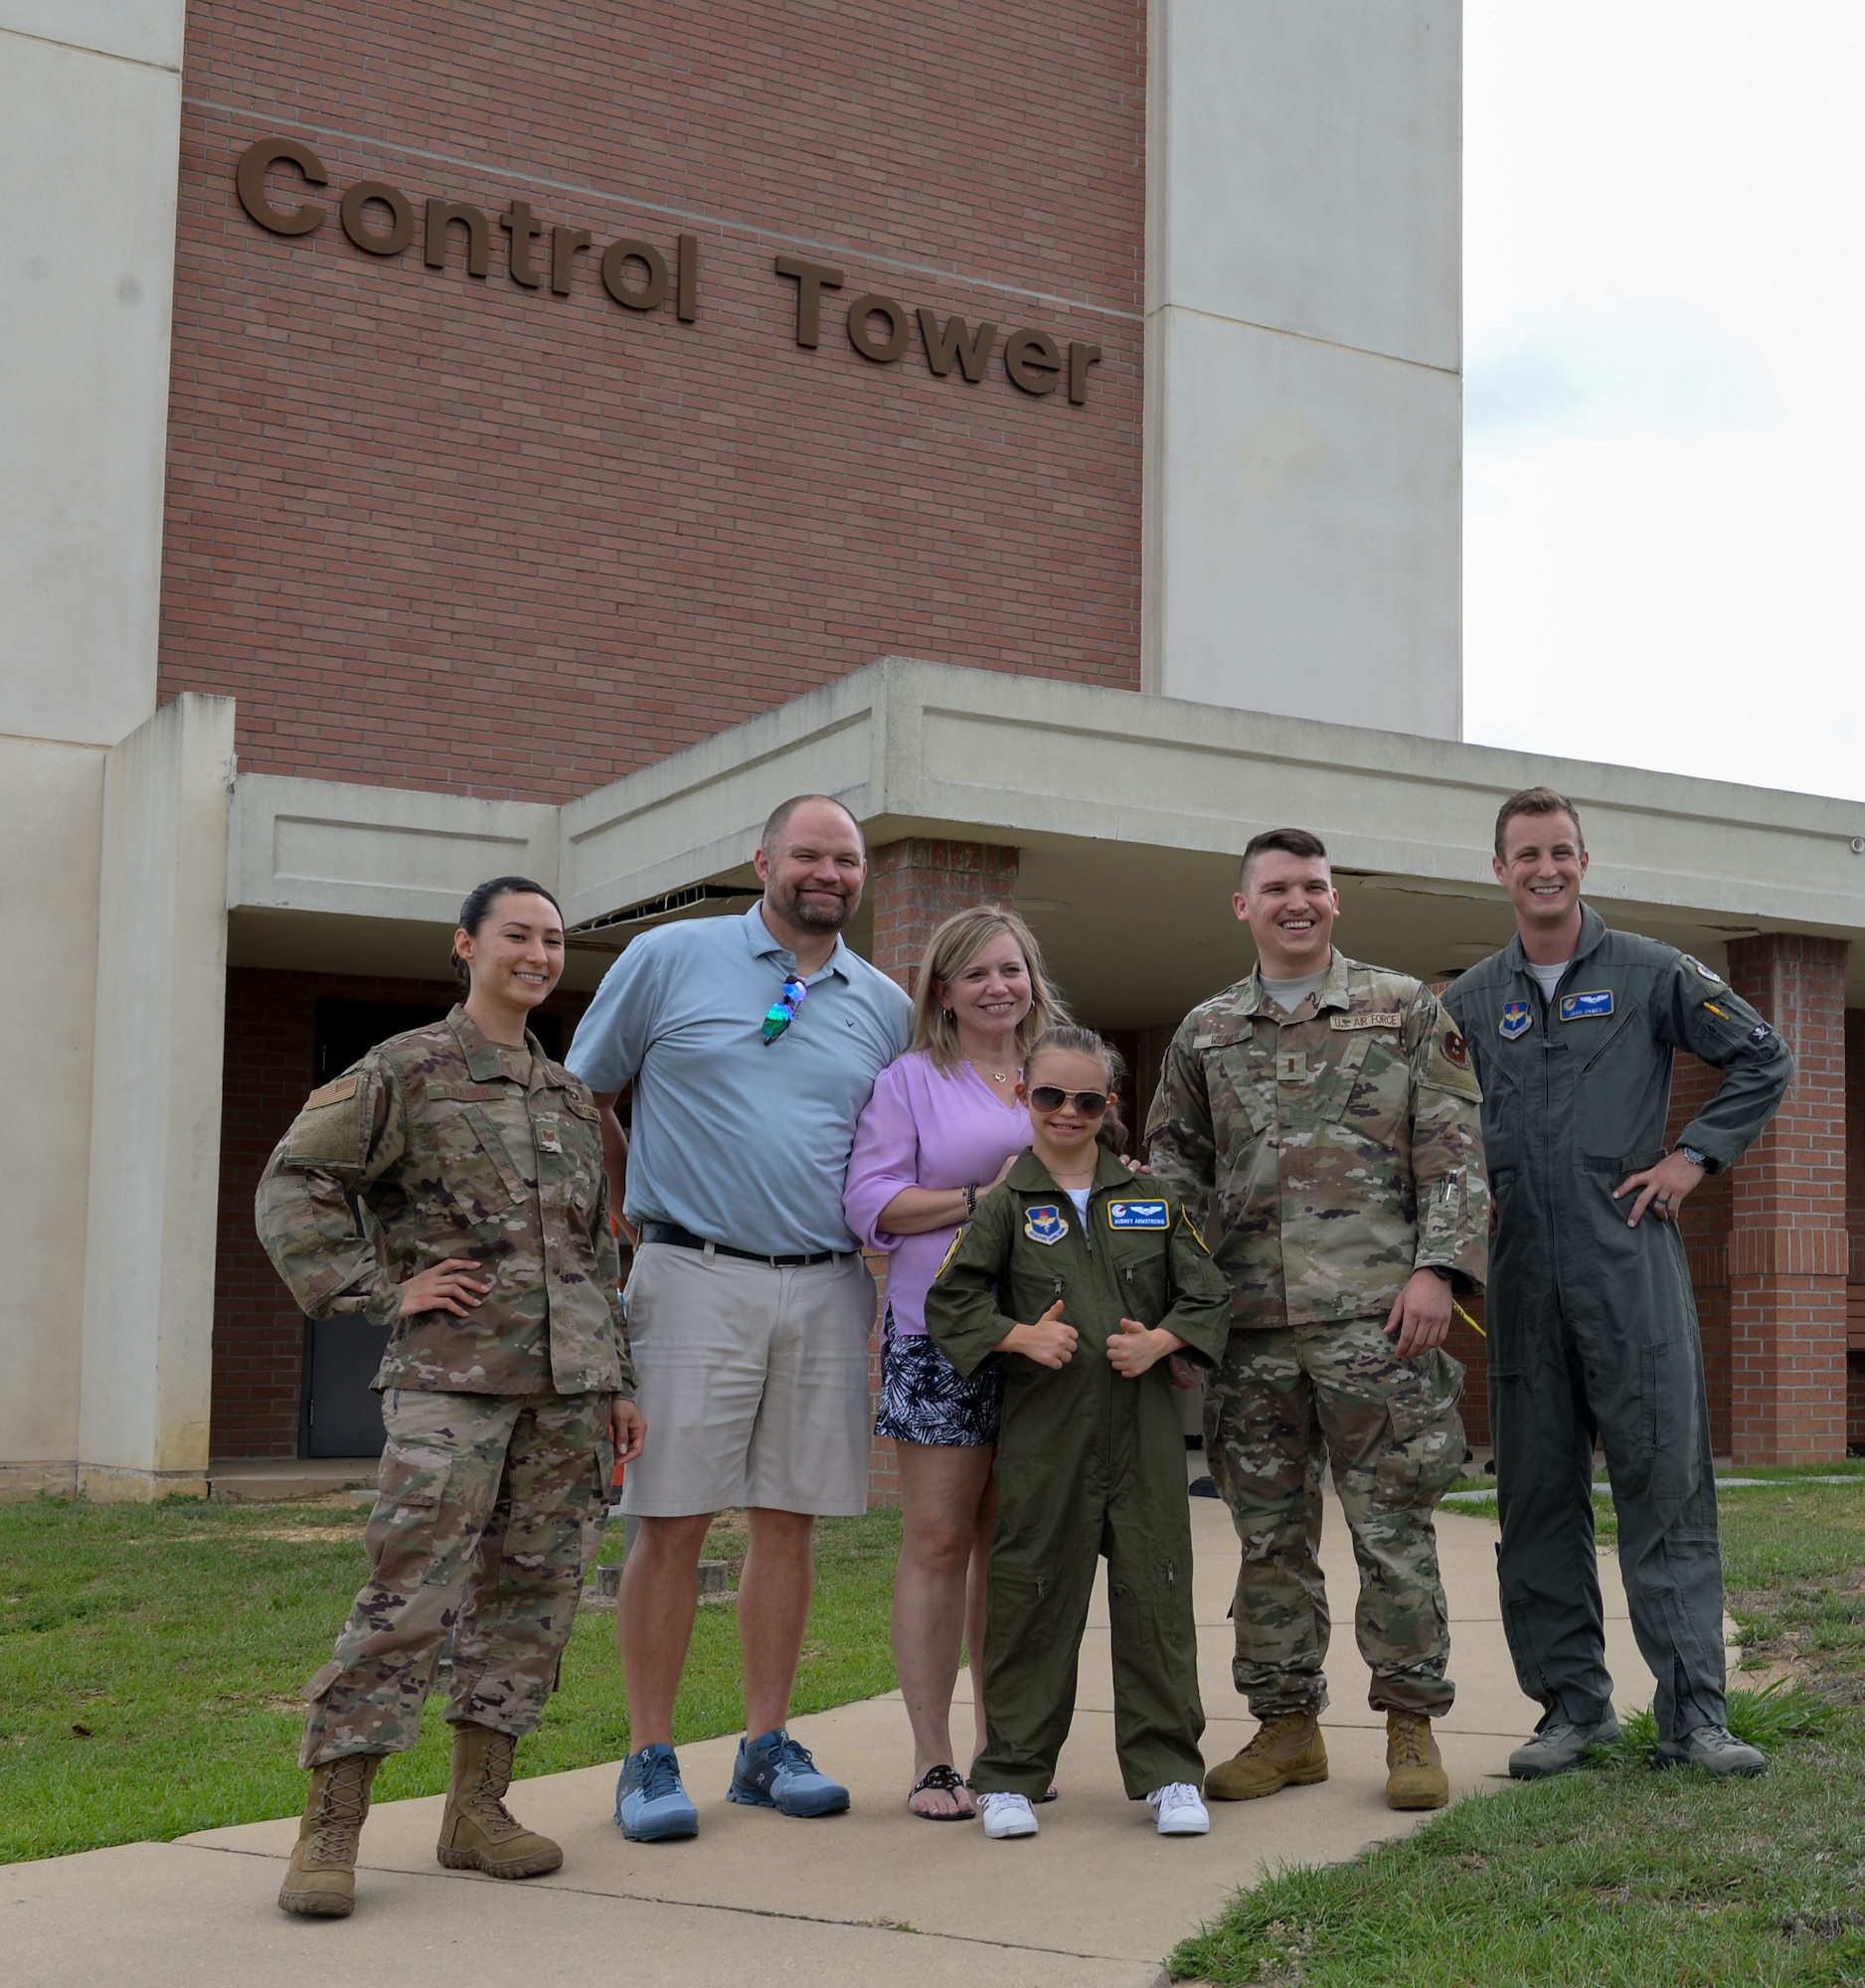 Aubrey Armstrong, her parents, an instructor pilot and members of the 14th Operations Group, stand in front of the Control Tower June 25, 2019, on Columbus Air Force Base, Miss. Aubrey went to the top of the Control Tower and caught a view of aircraft taking off. (U.S. Air Force photo by Airman Davis Donaldson)